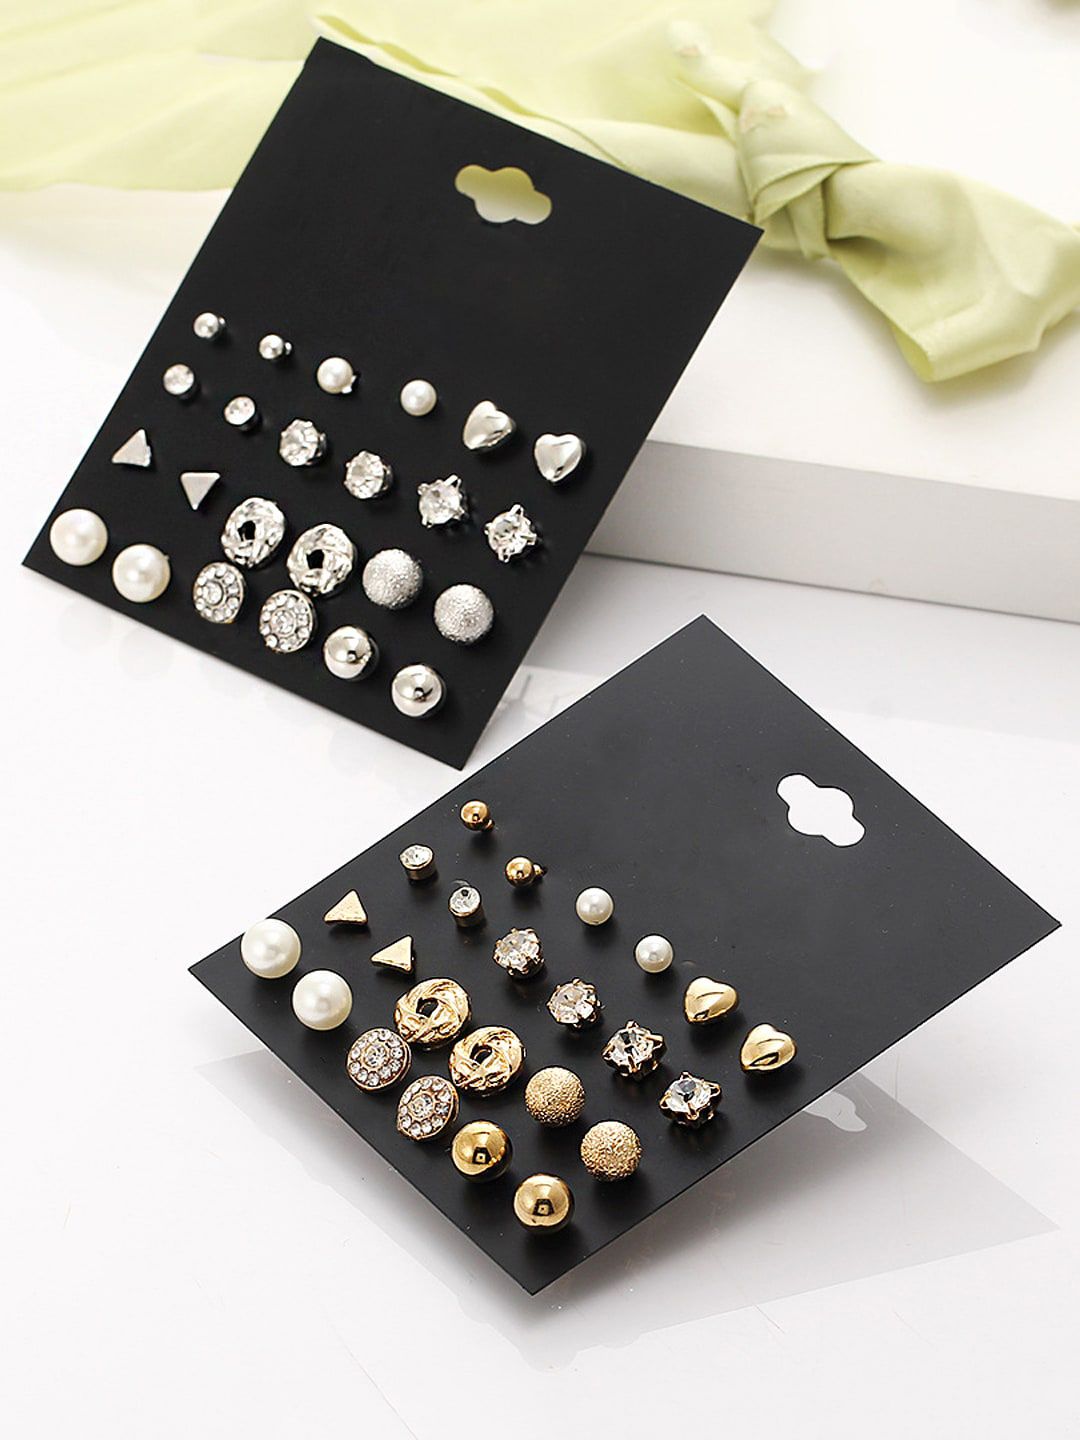 Yellow Chimes Gold-Toned & Silver-Toned Set of 24 Quirky Studs Earrings Price in India